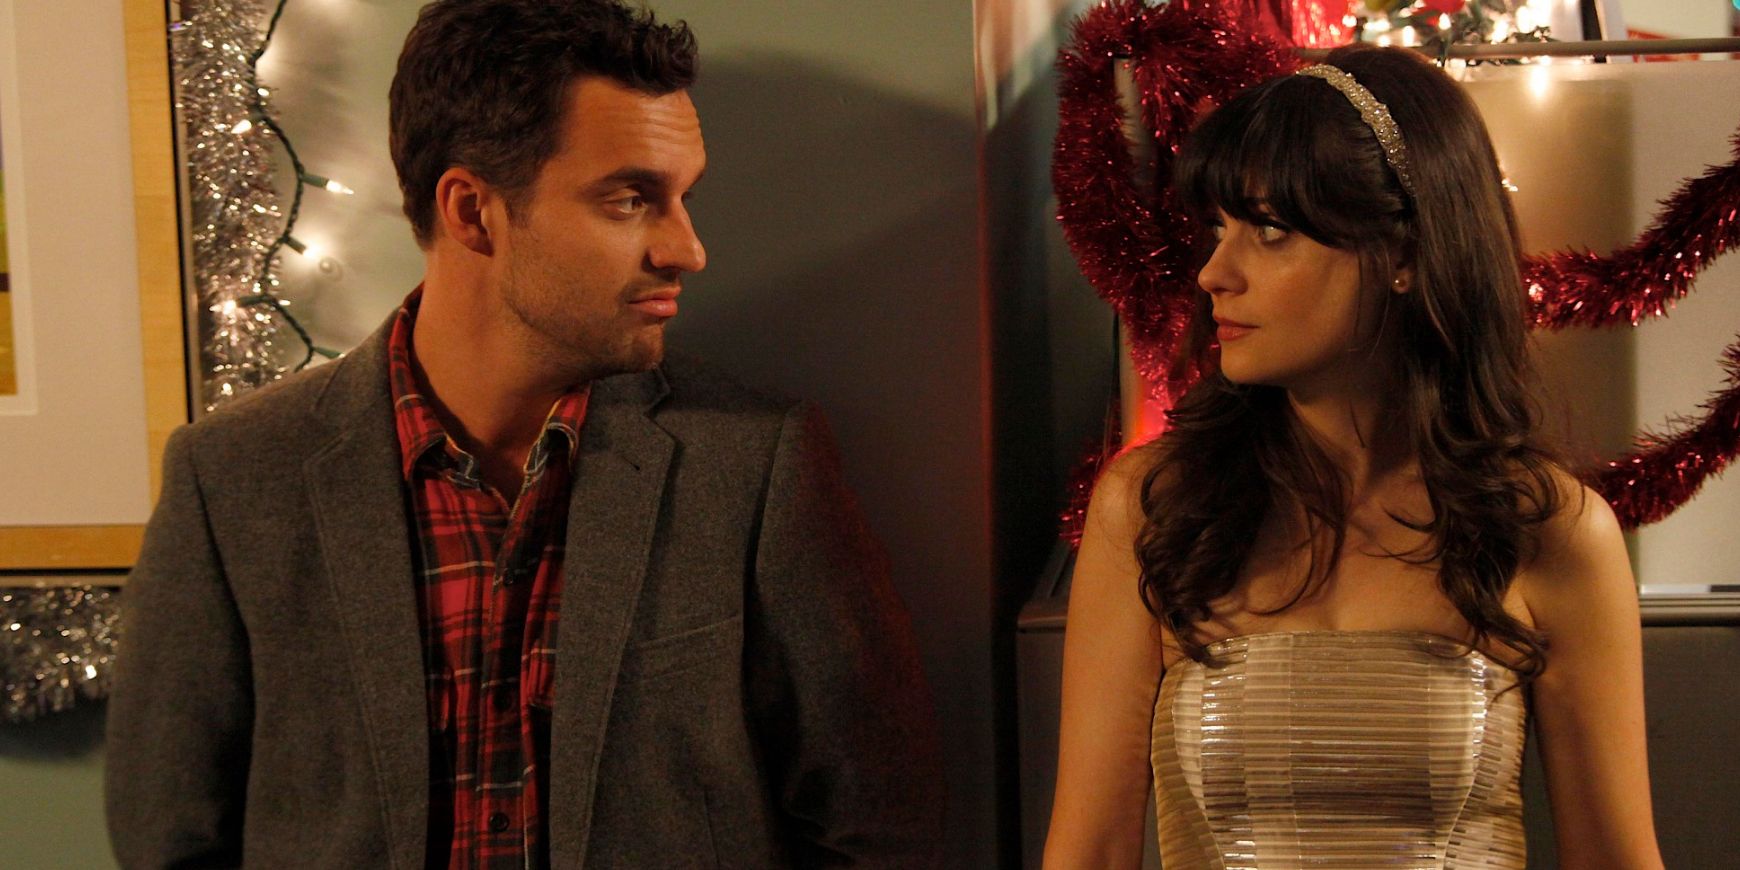 New Girl The Best Holiday Episodes Ranked (According To IMDb)